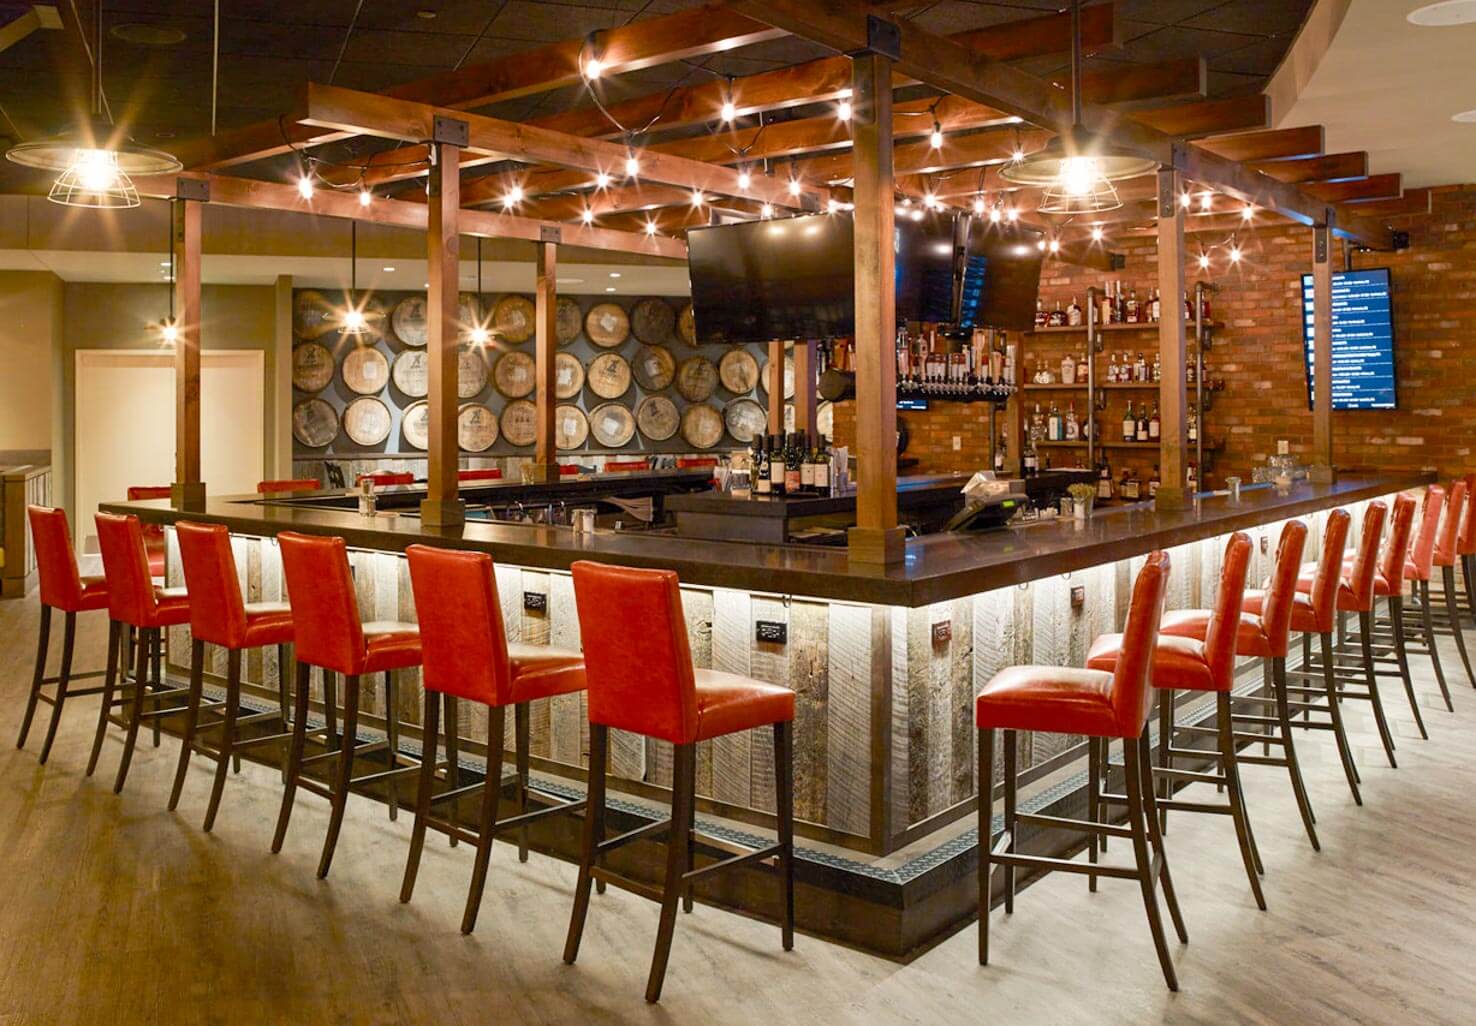 Red bar stools around a wooden themed bar area